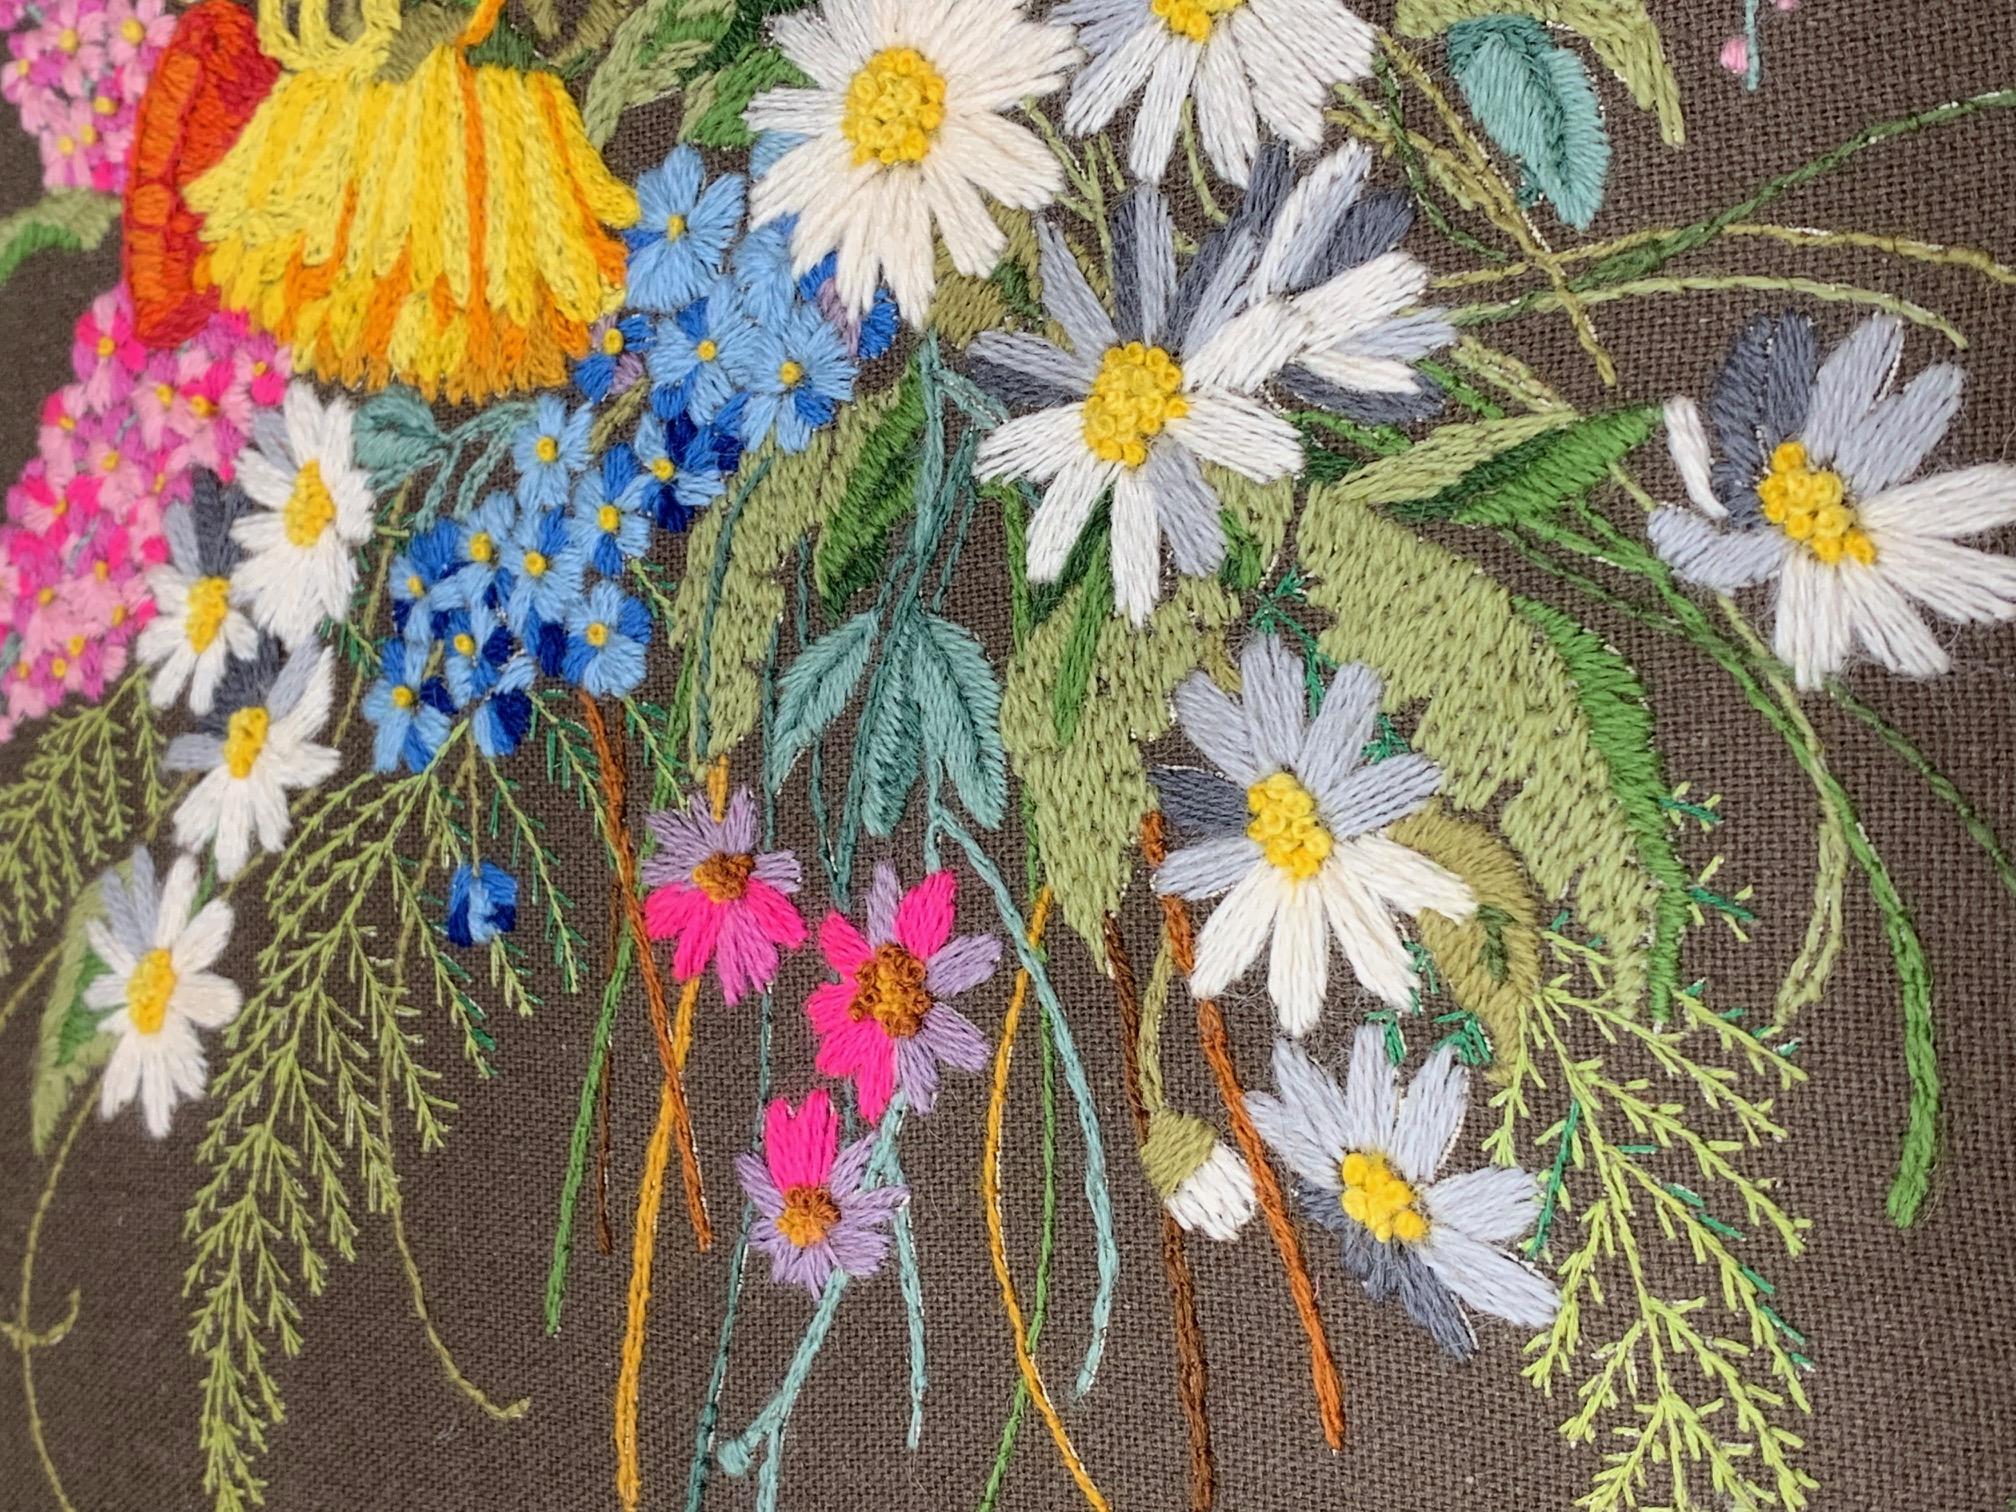 Framed wall embroidery features beautiful floral motif on dark khaki fabric with wood frame, circa 1970s. Very good condition.